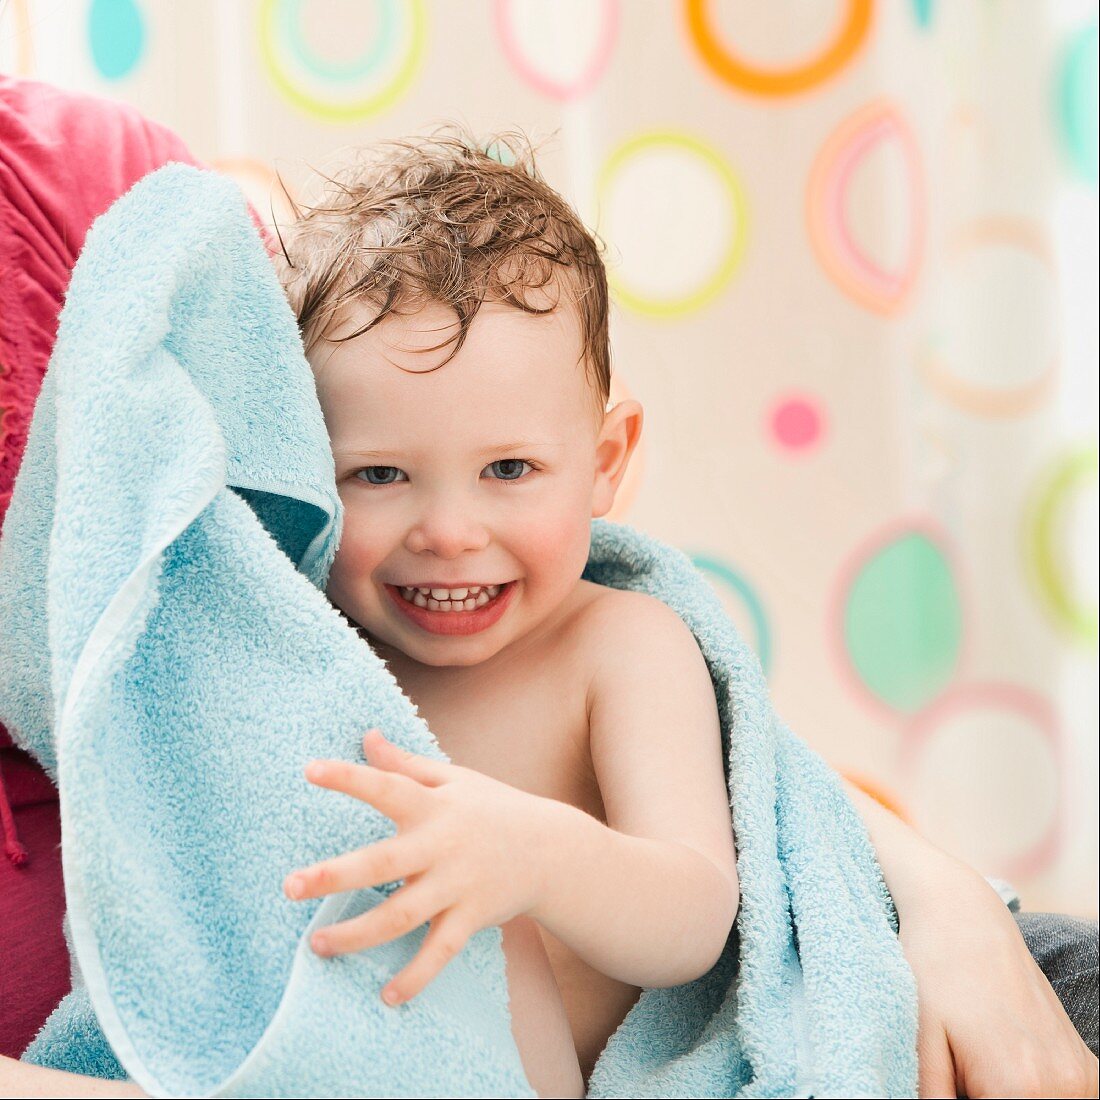 USA, Utah, Lehi, mother with son (2-3) wrapped in towel